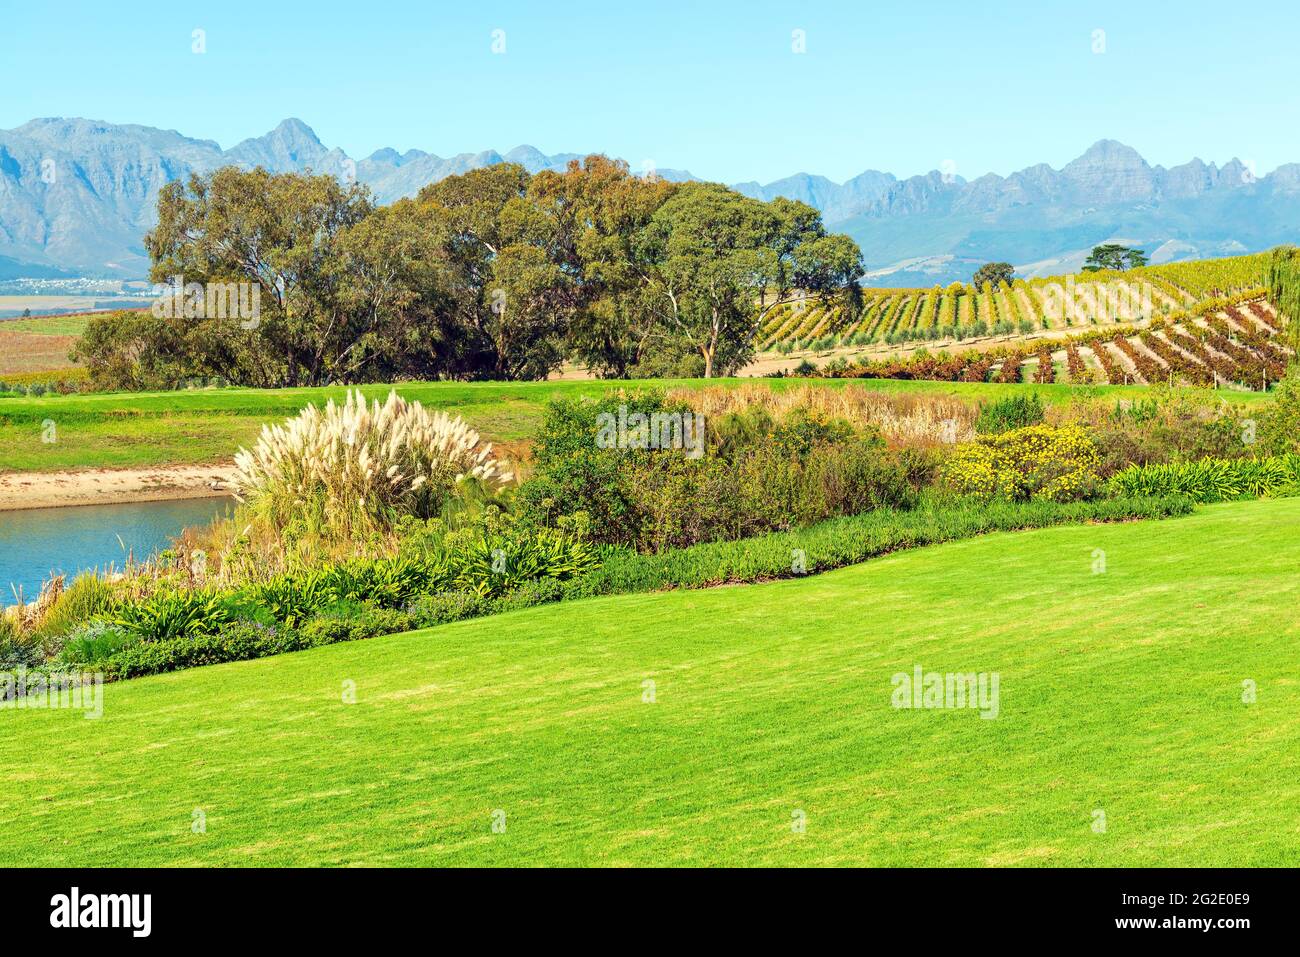 Vineyard landscape in the region of Stellenbosch and Paarl near Cape Town, South Africa. Stock Photo